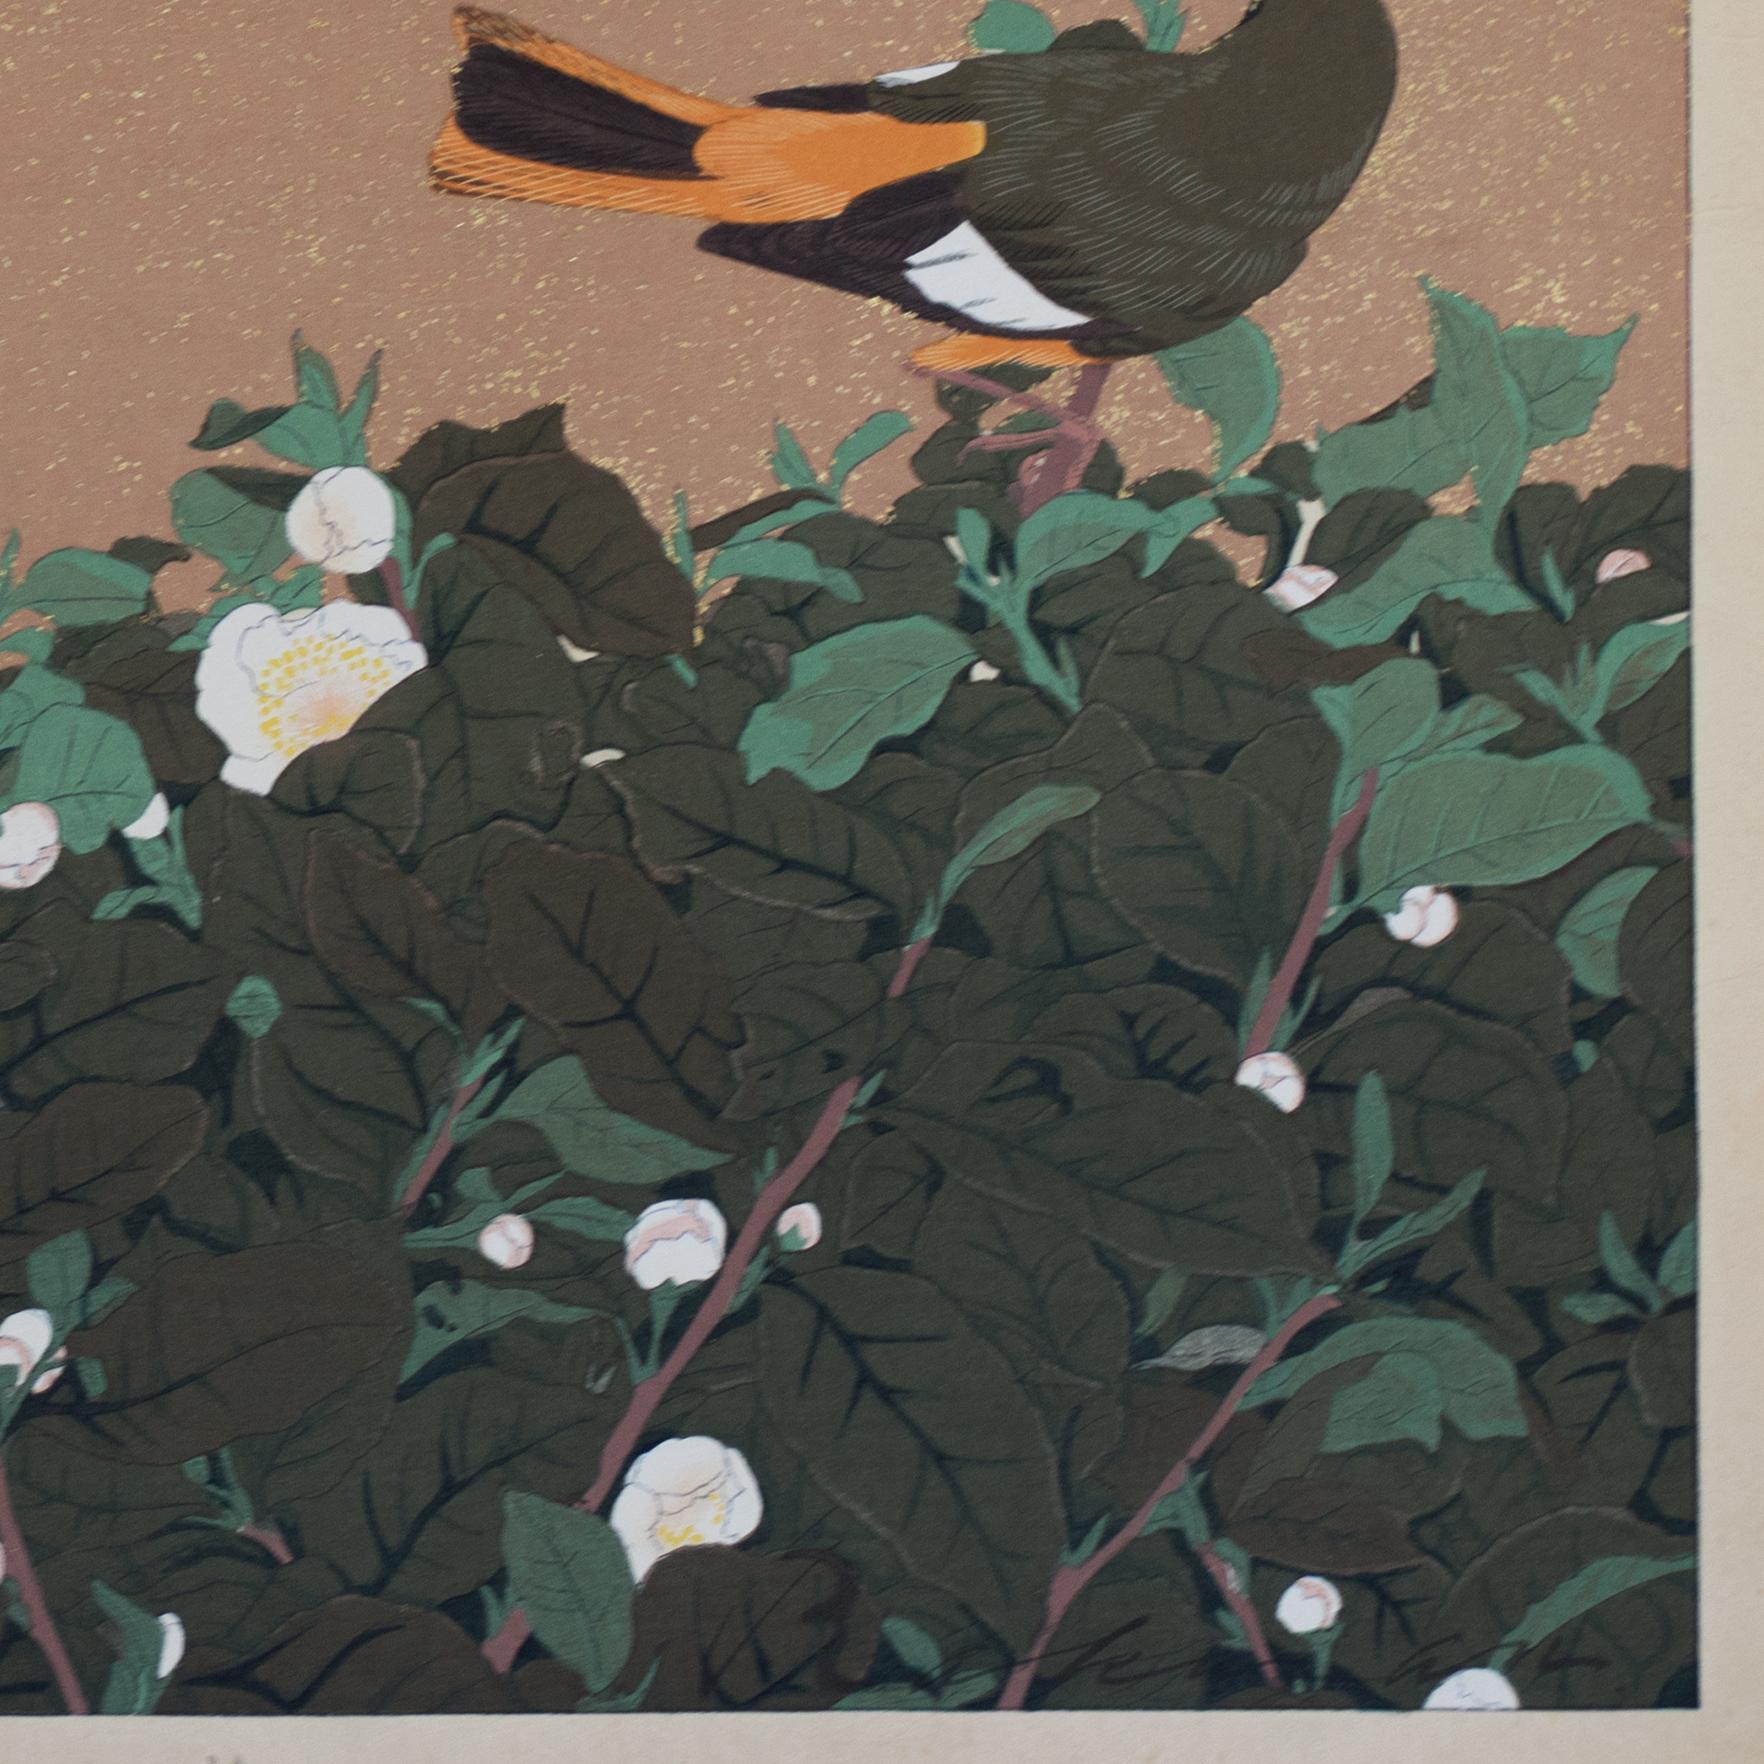 Tea Flowers and Daurian Redstarts (Winter) (Cha no hana ni hitaki fuyu). Two native redstarts with beautiful orange plumage perch on white tea flowers. The bird on the left is the male and the one on the right is the female. They are posed with  the